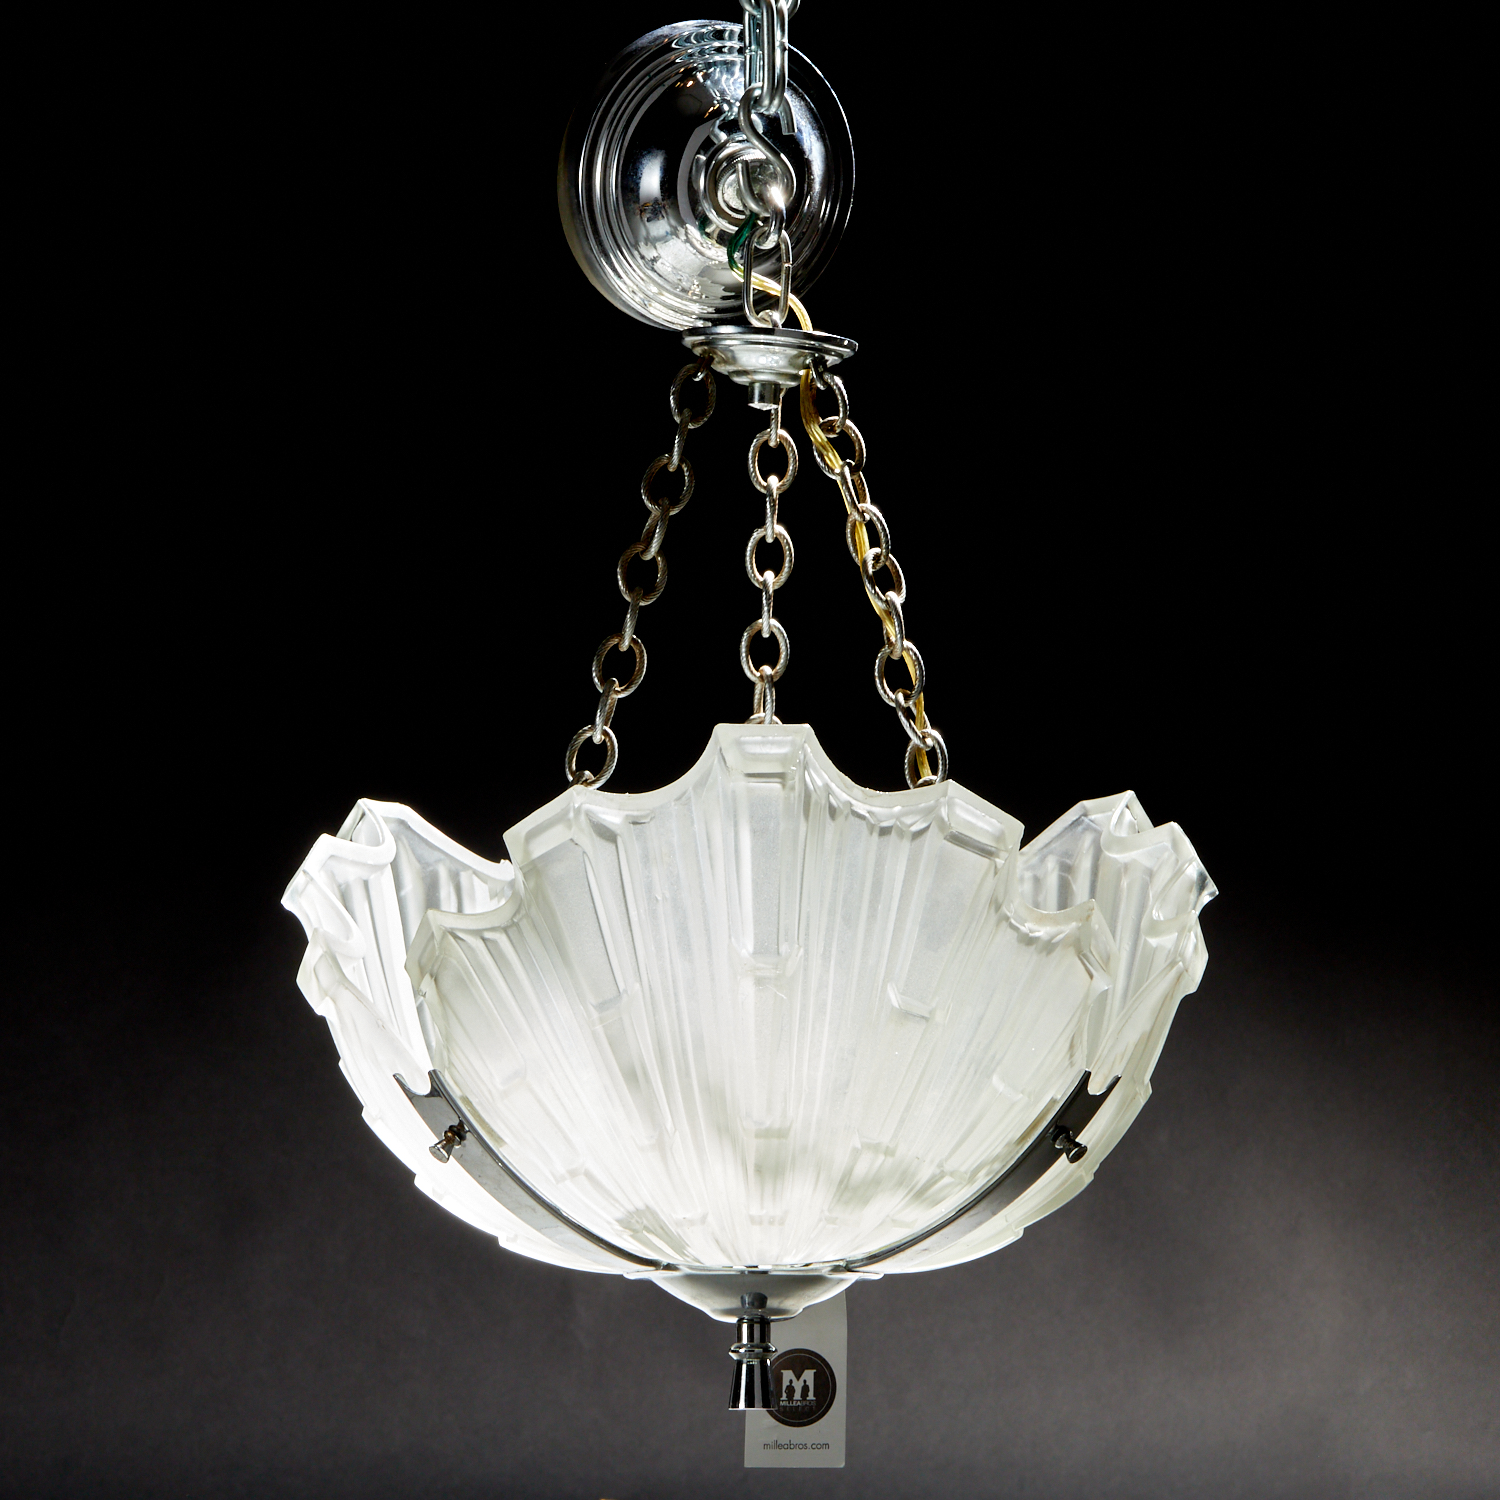 ART DECO STYLE FROSTED GLASS SEASHELL